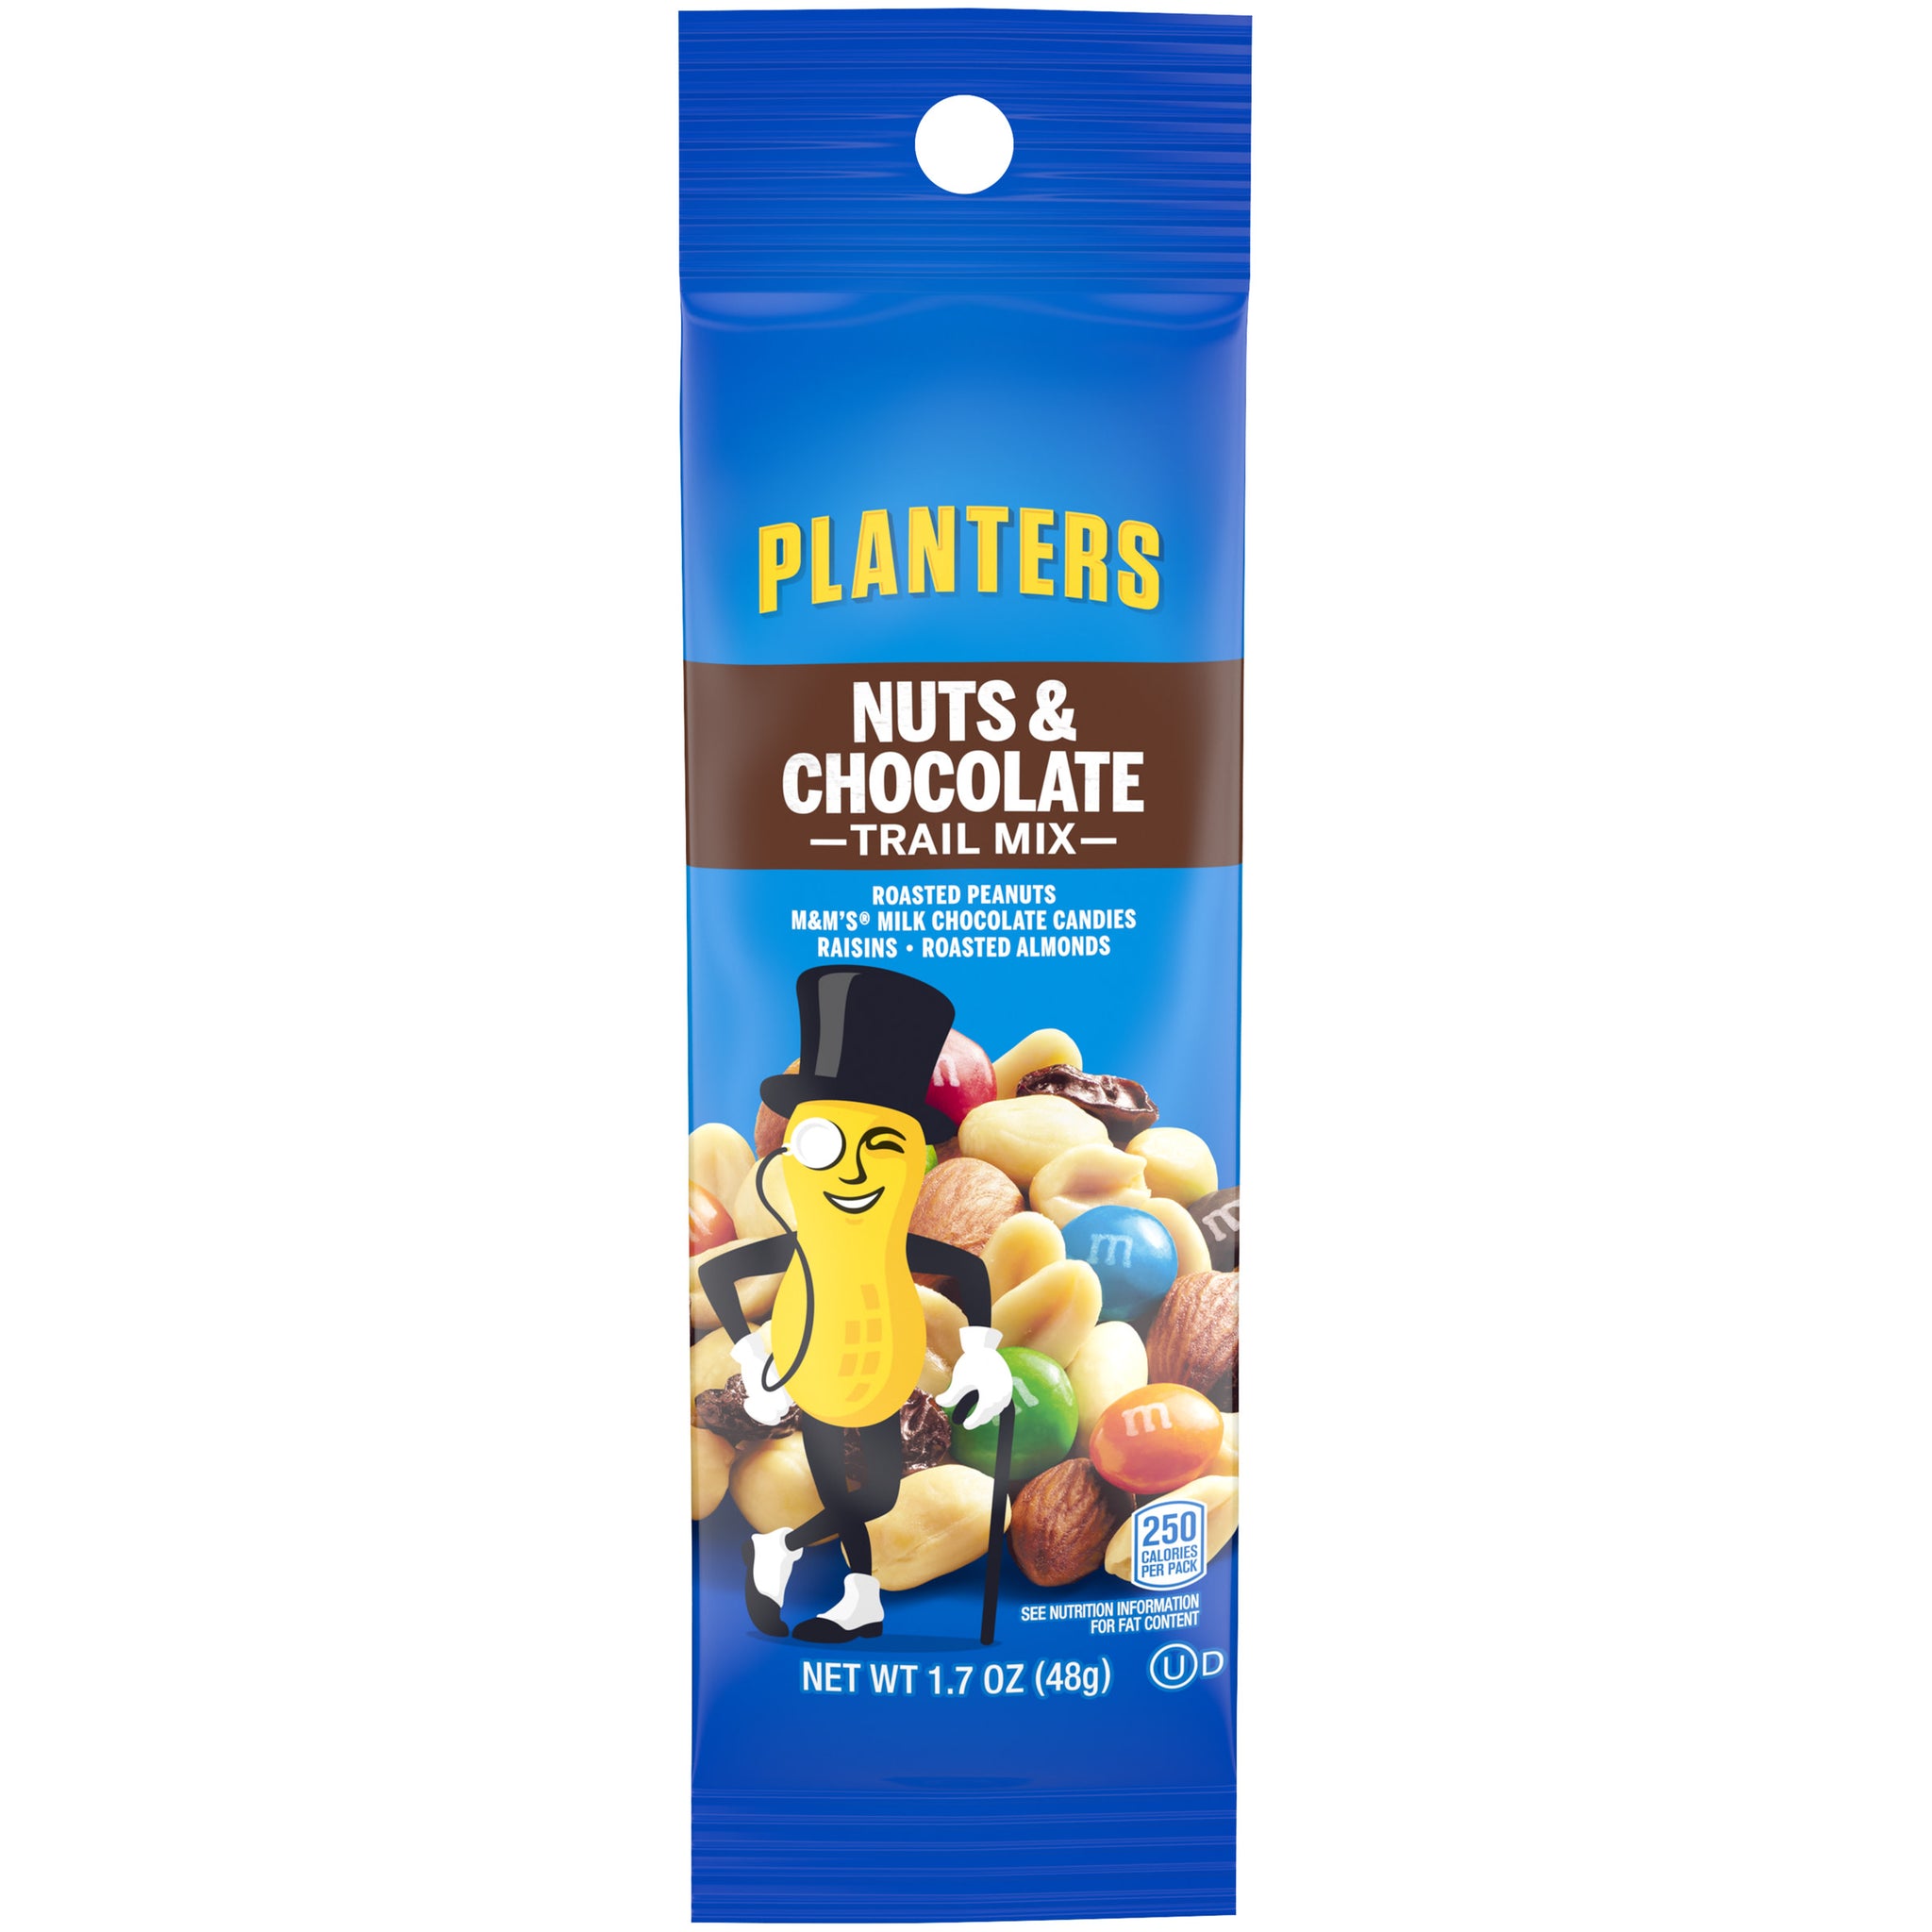 Planters Nuts & Chocolate Trail Mix with Roasted Peanuts, M&M Chocolate Candies, Raisins & Roasted Almonds,  Pack